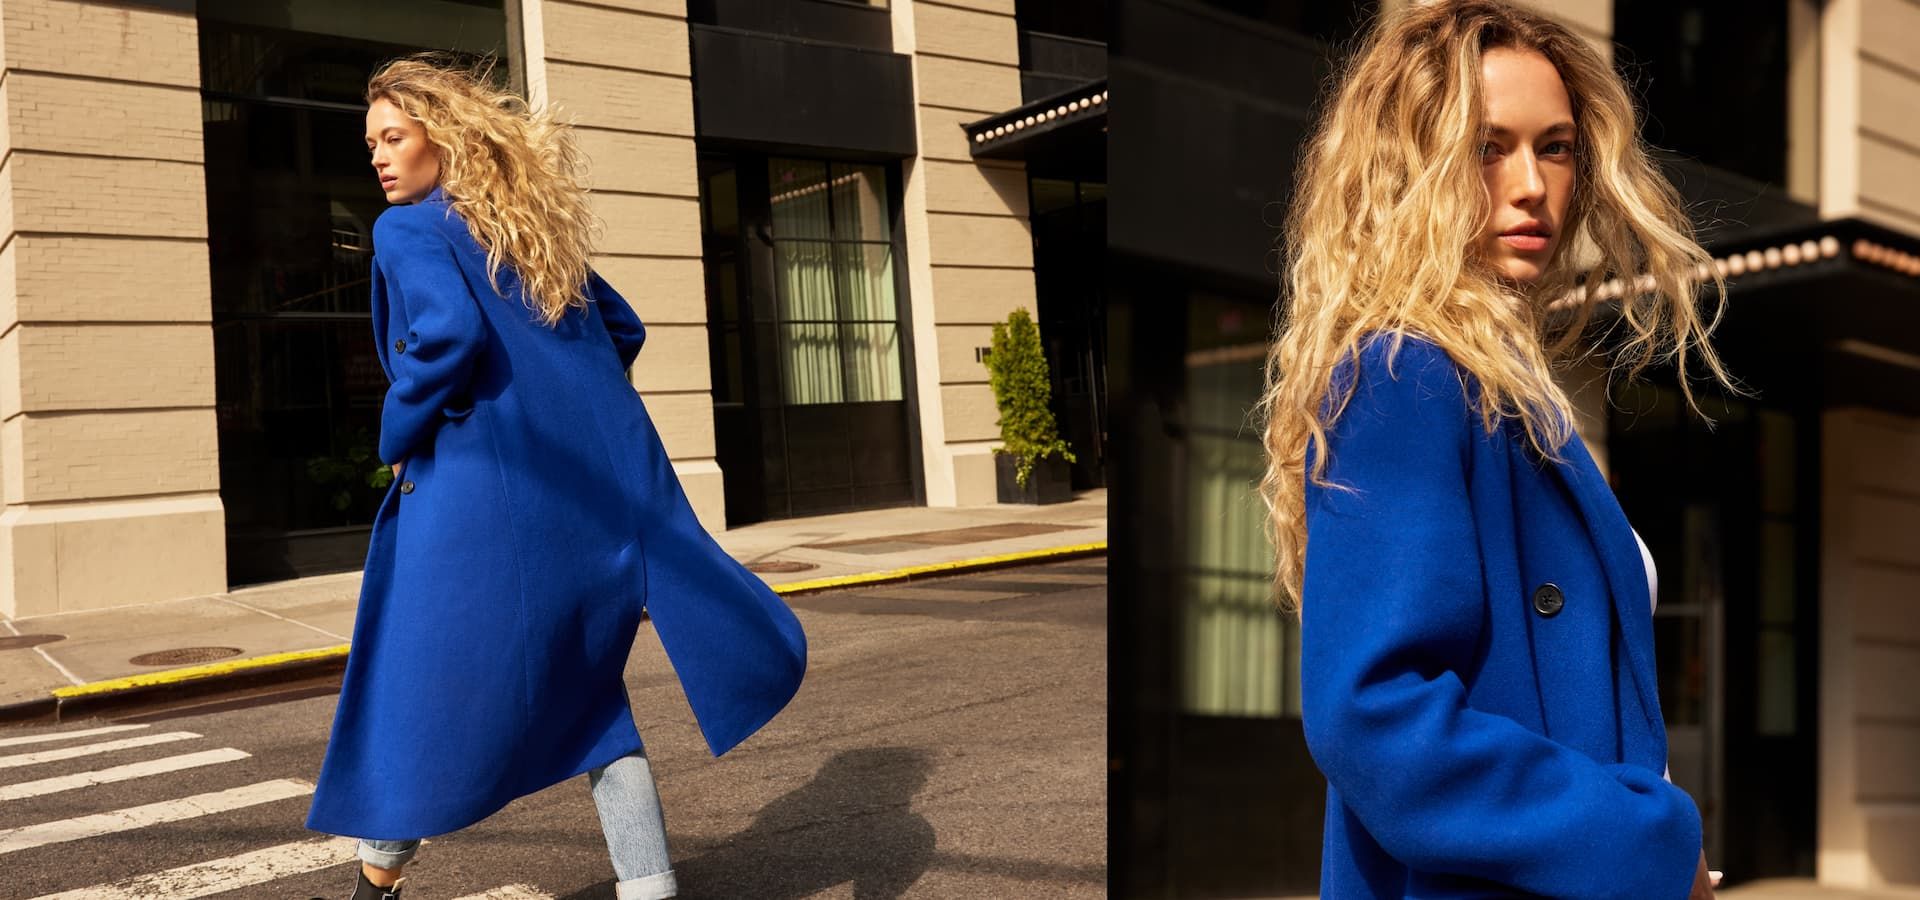 A model wears a bright blue coat over blue jeans.